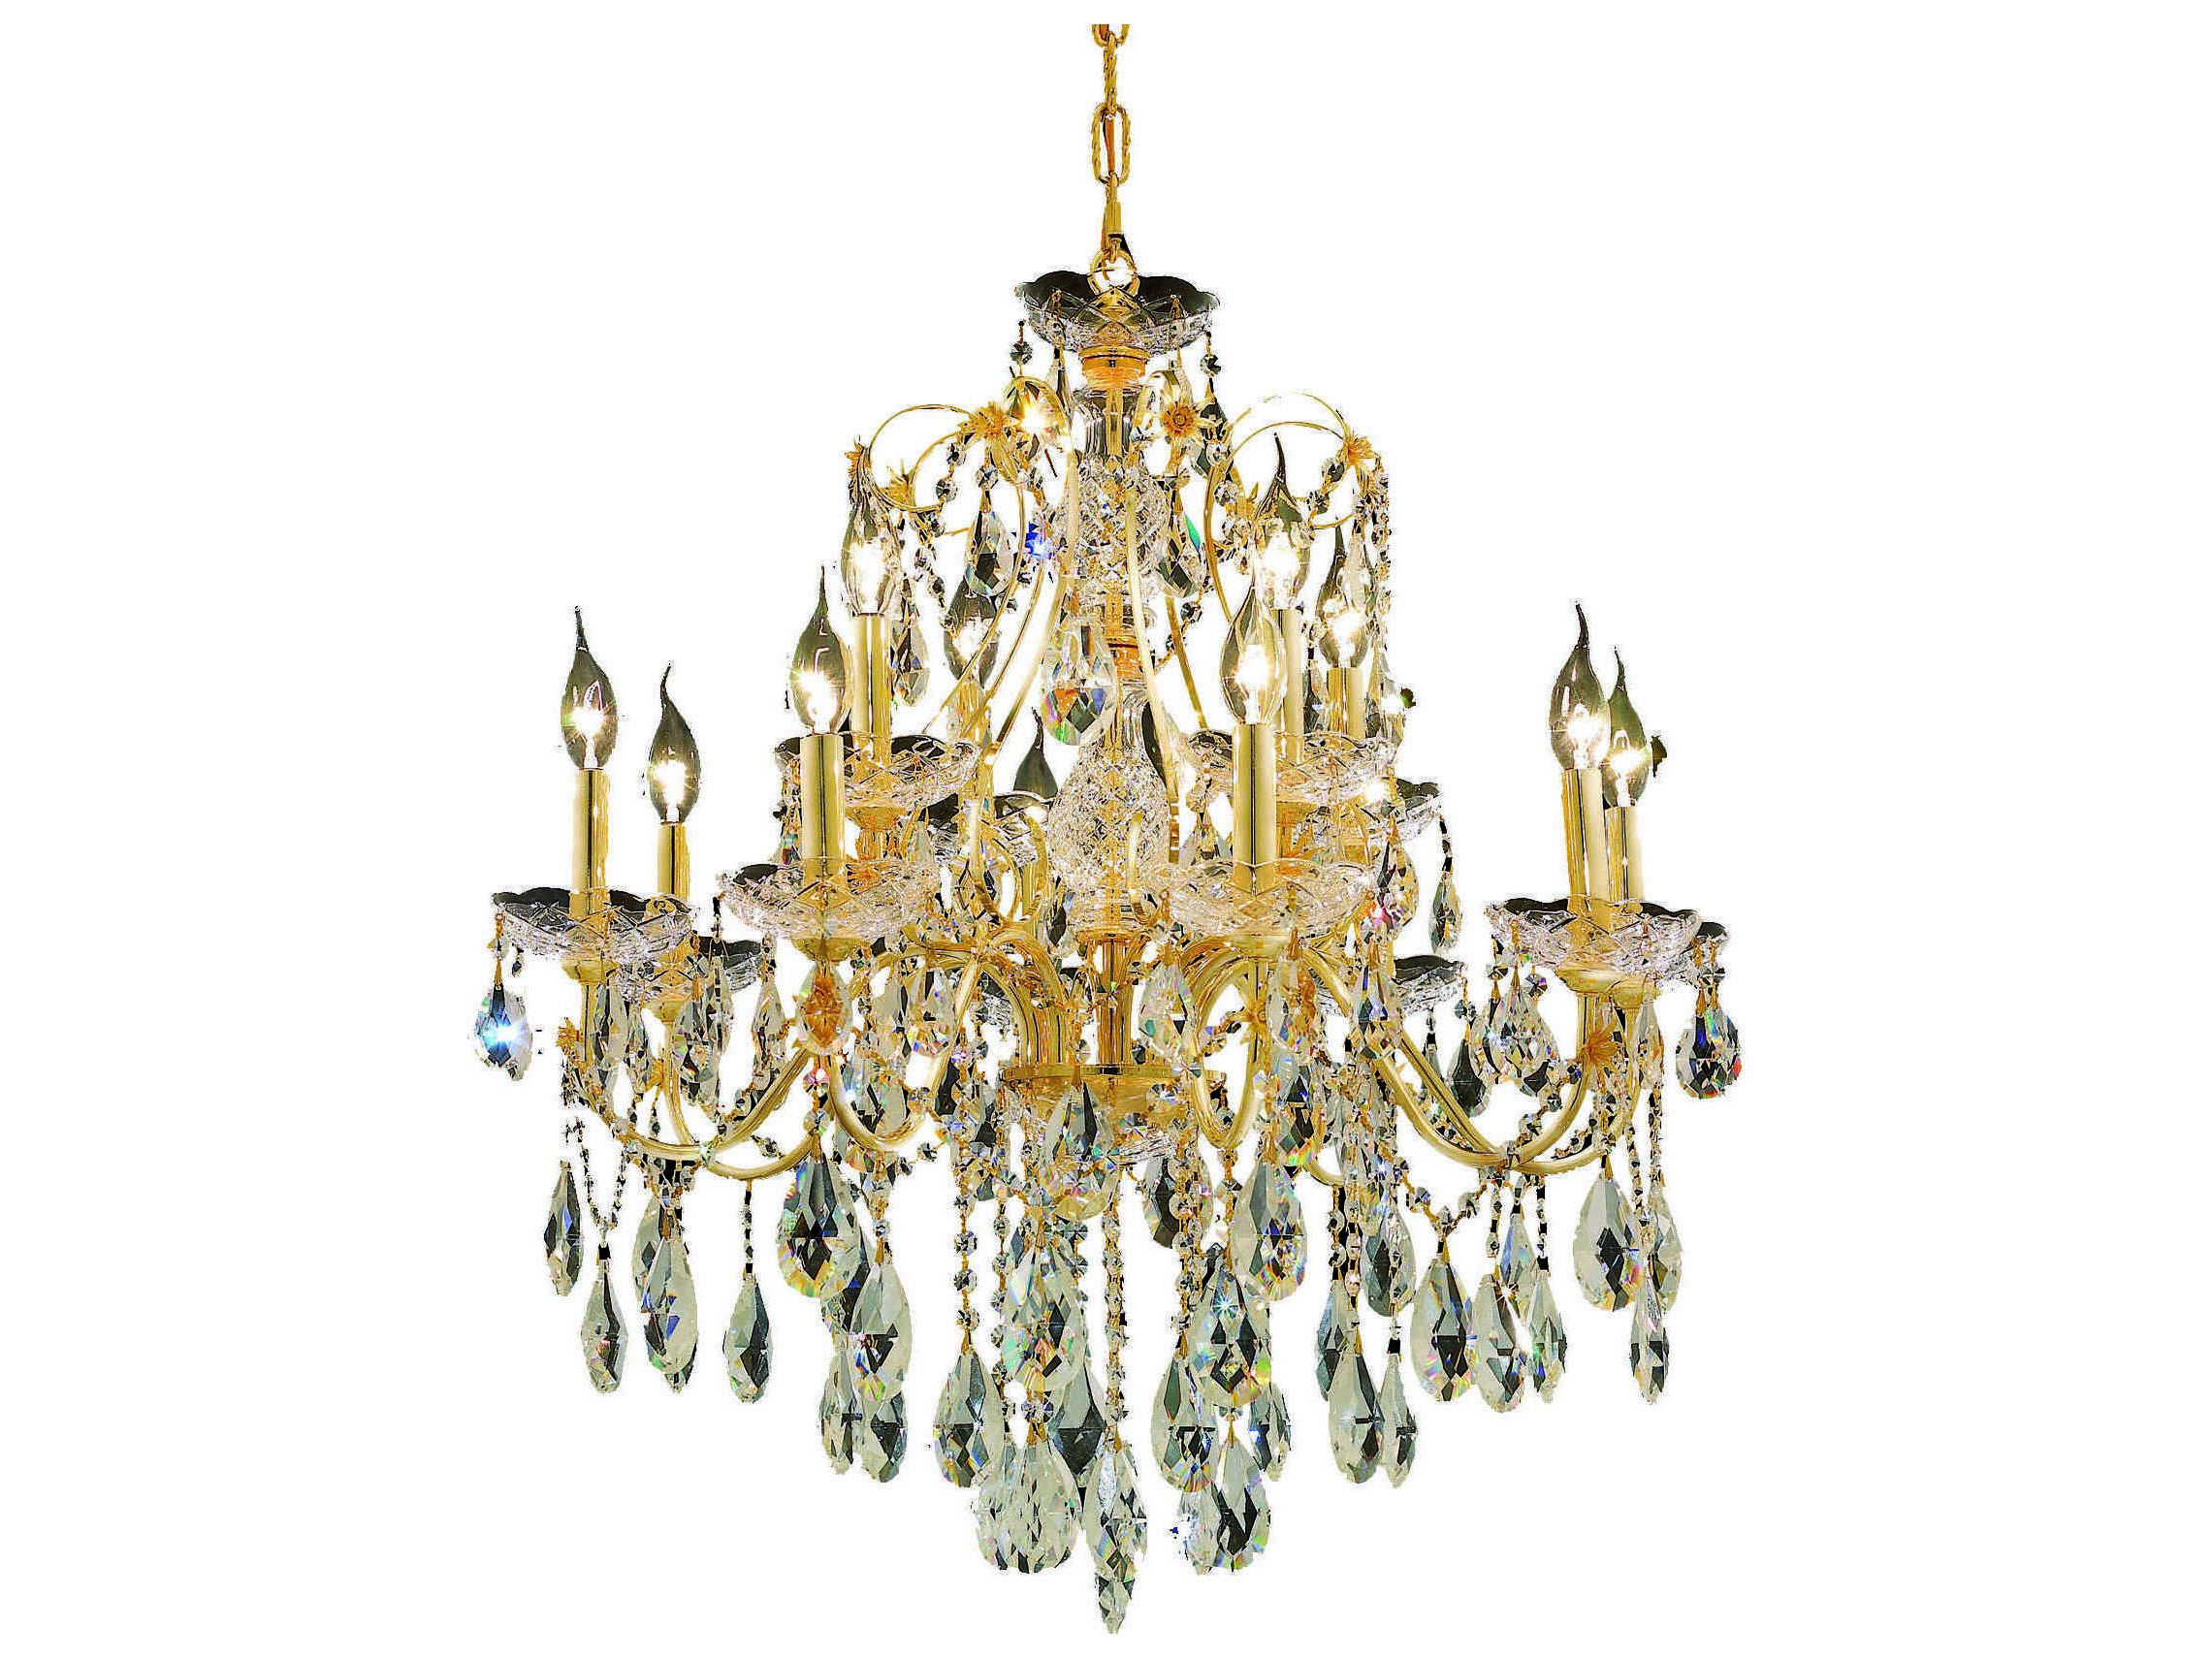 Royal Cut Crystal Chandeliers In Latest Elegant Lighting St (View 4 of 20)